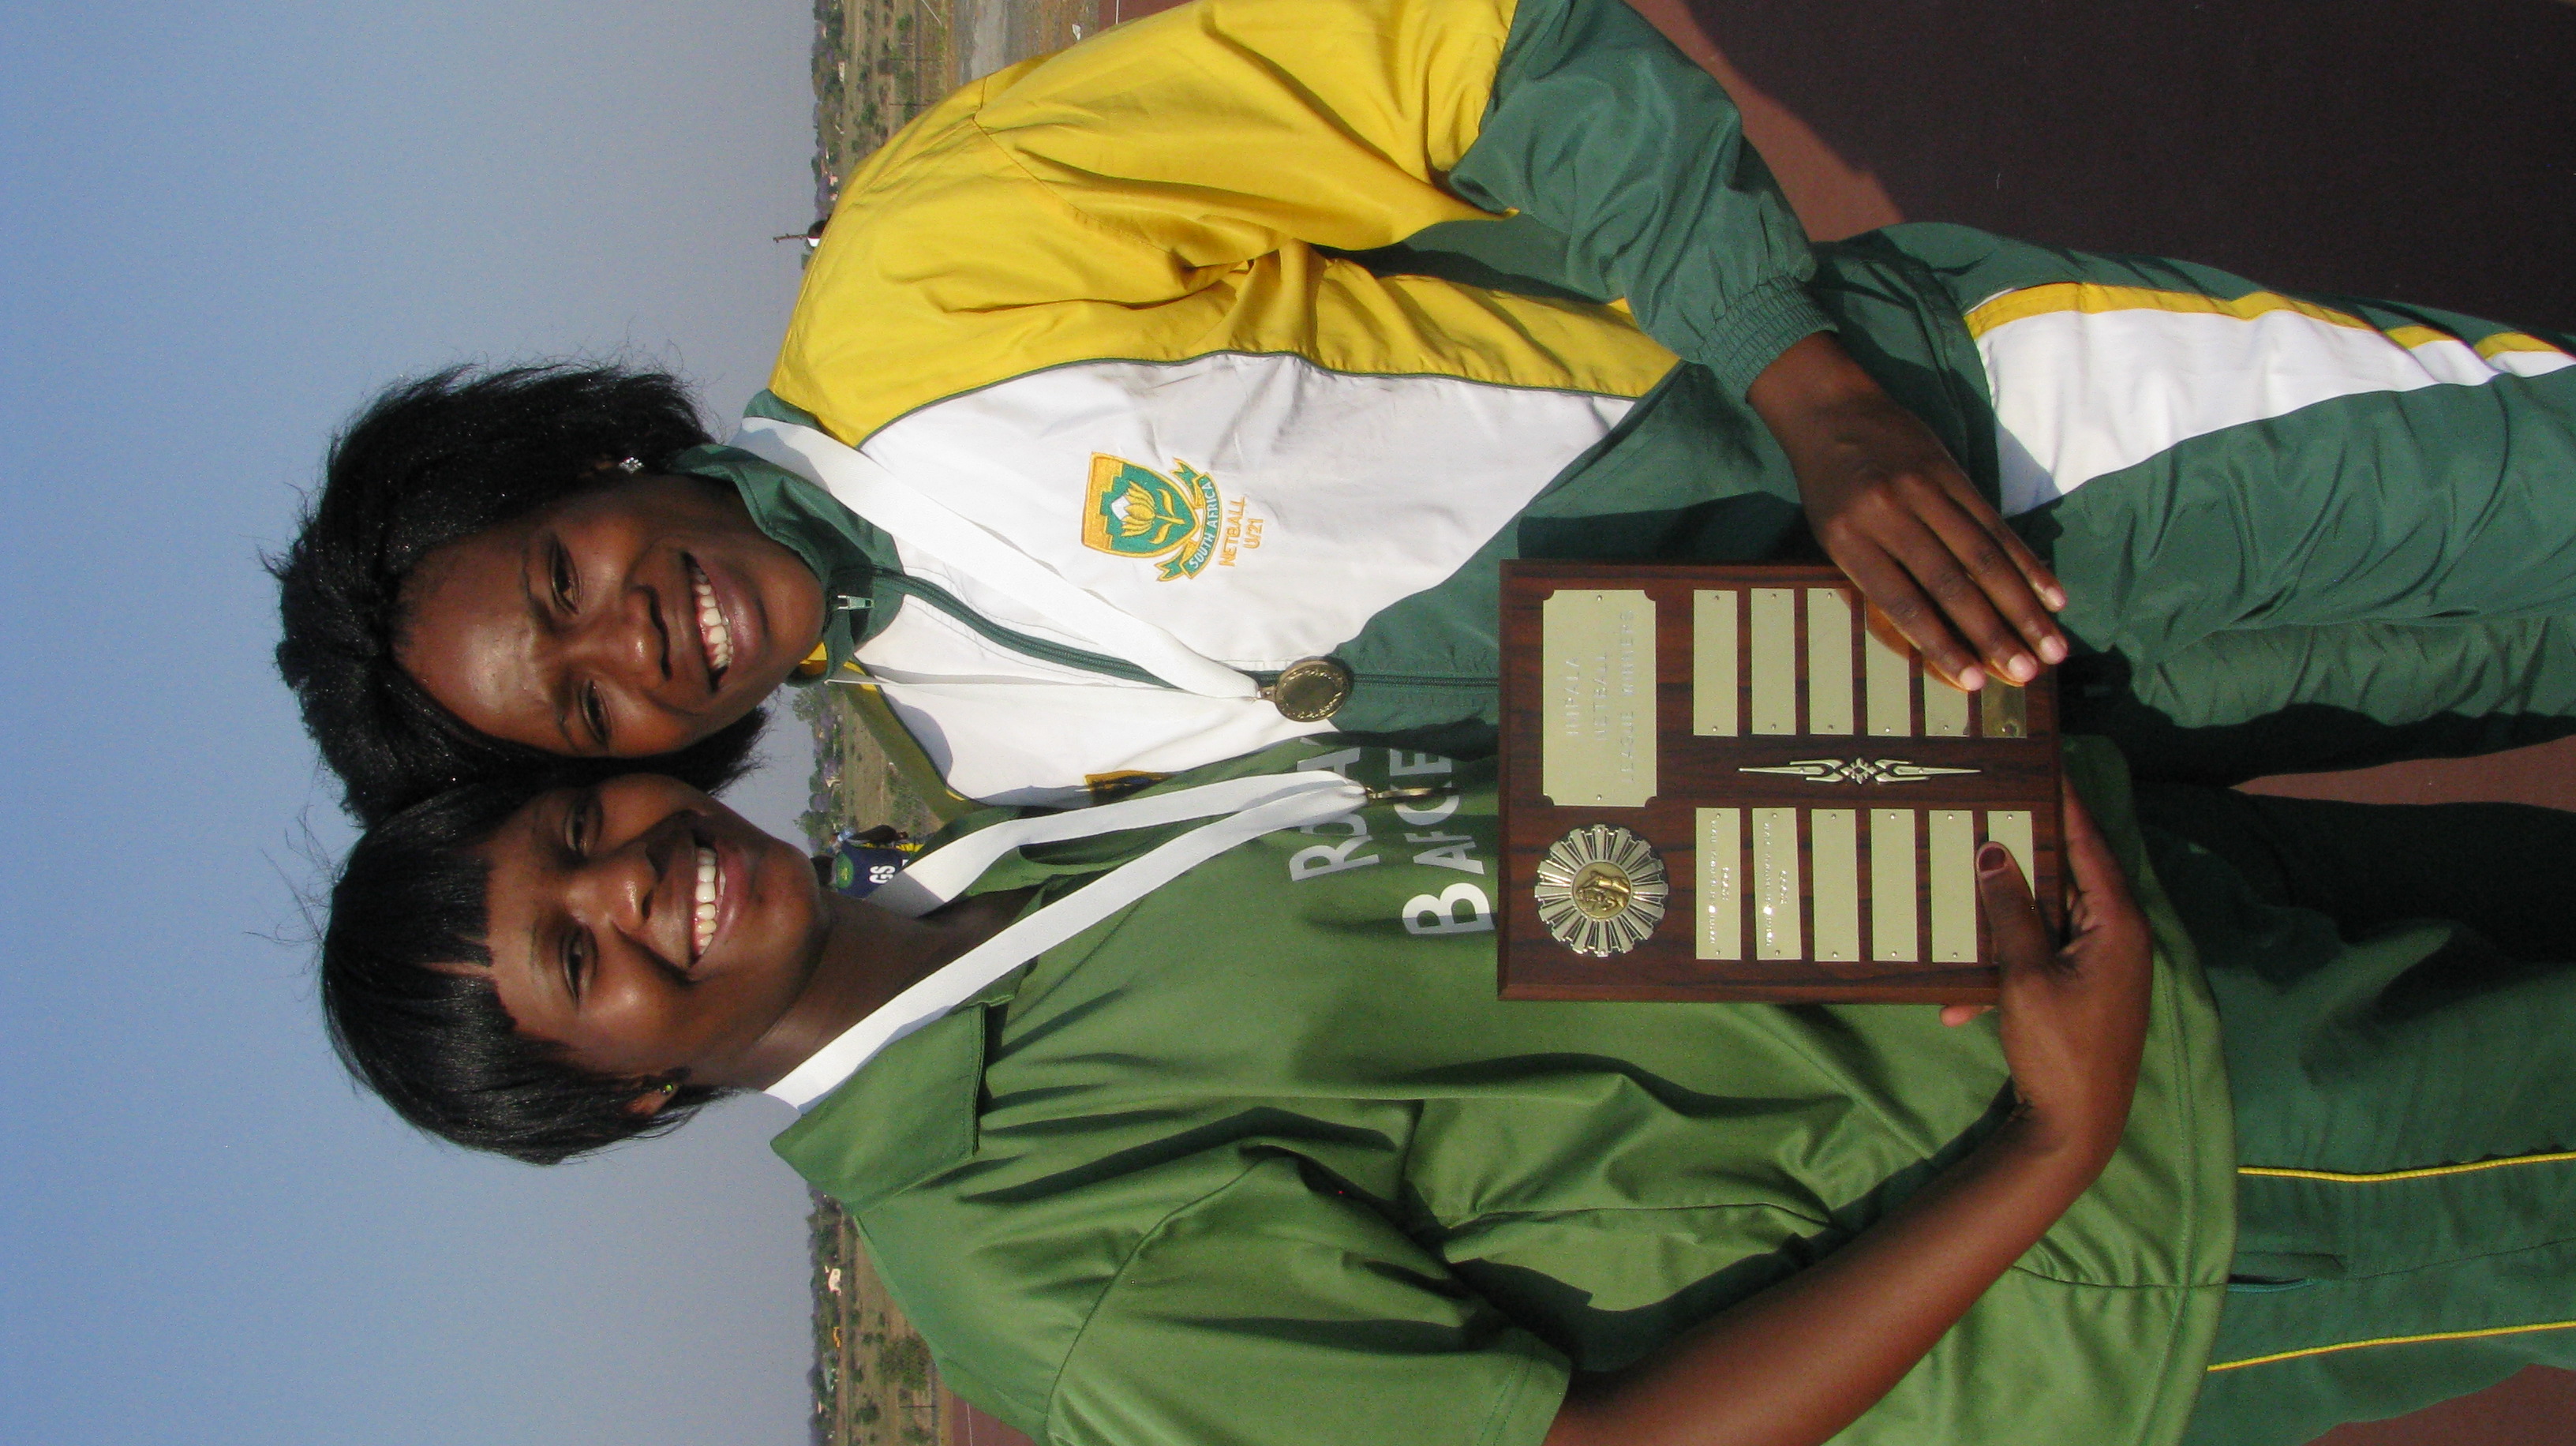 Provincial Player and Netball Coach- Star Dlwathi and National Player Kgomotso Itlhabaneng